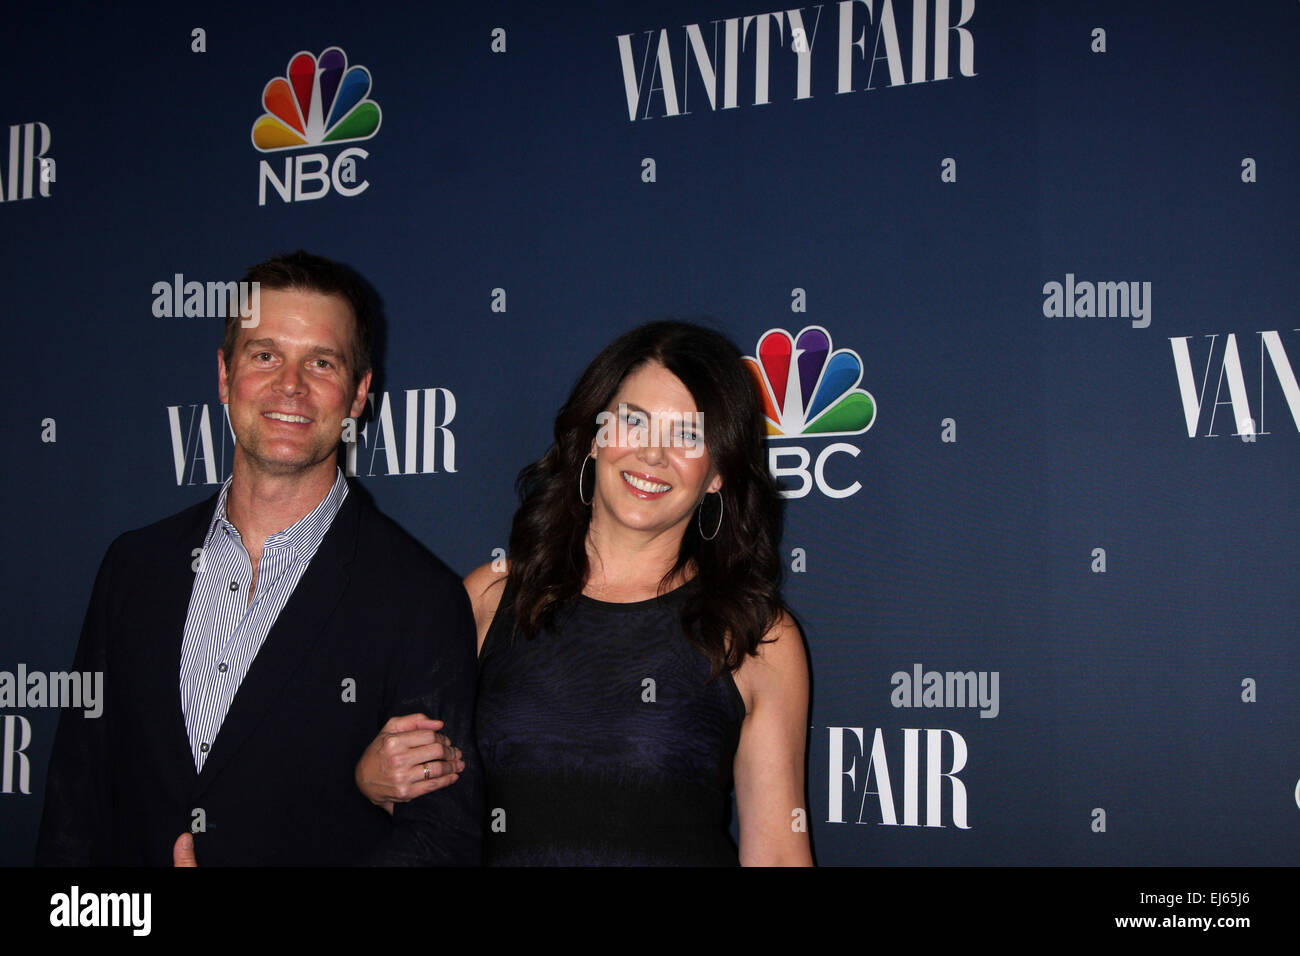 NBC & Vanity Fair's 2014-2015 TV Season Event at Hyde Sunset Featuring: Peter Krause,Lauren Graham Where: Los Angeles, California, United States When: 17 Sep 2014 Stock Photo